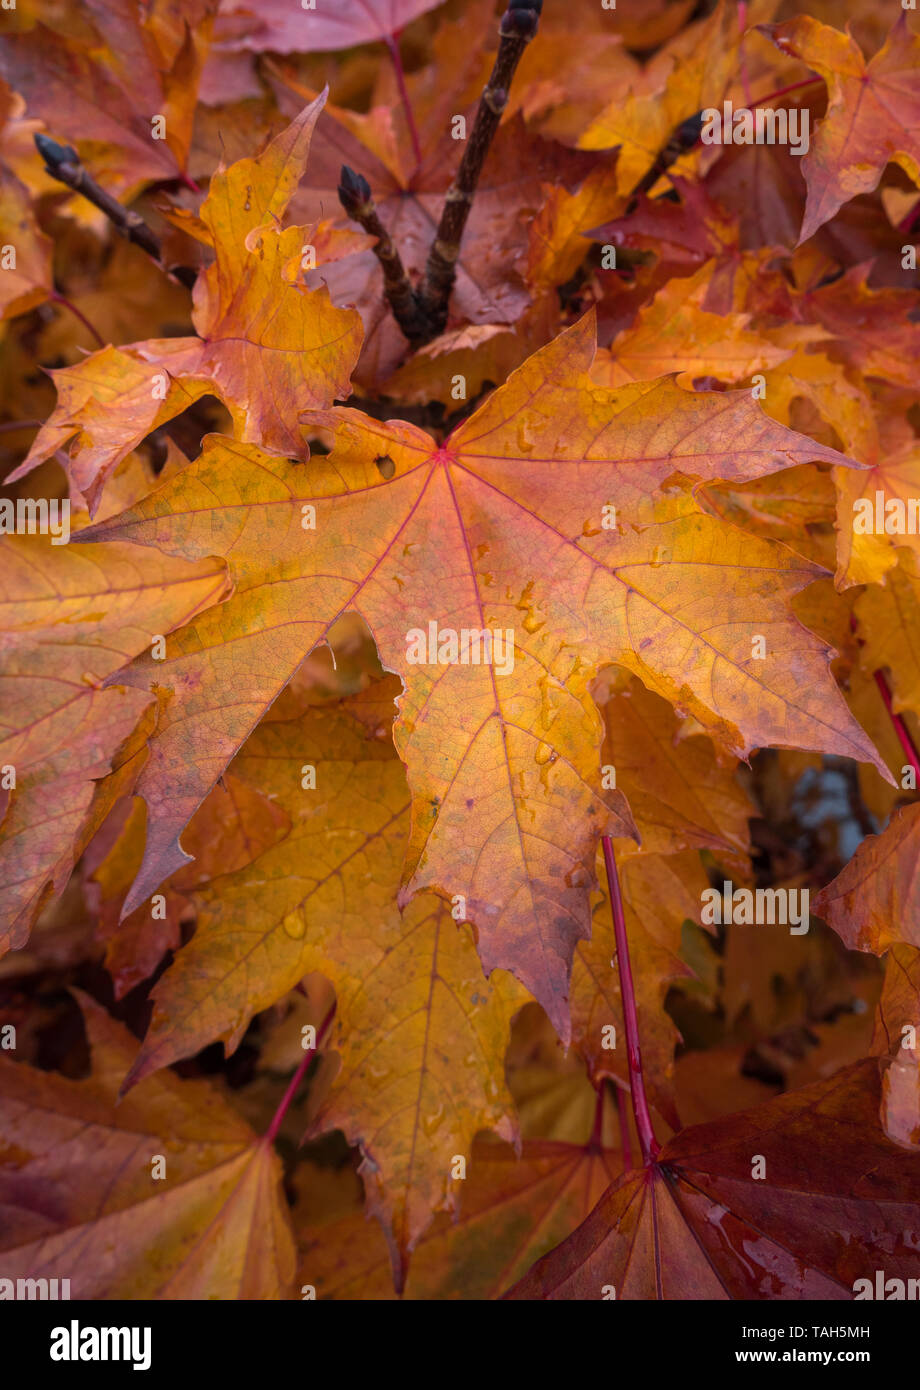 Maple leaves with autumn season red, orange and yellow colors background with copy space. Stock Photo